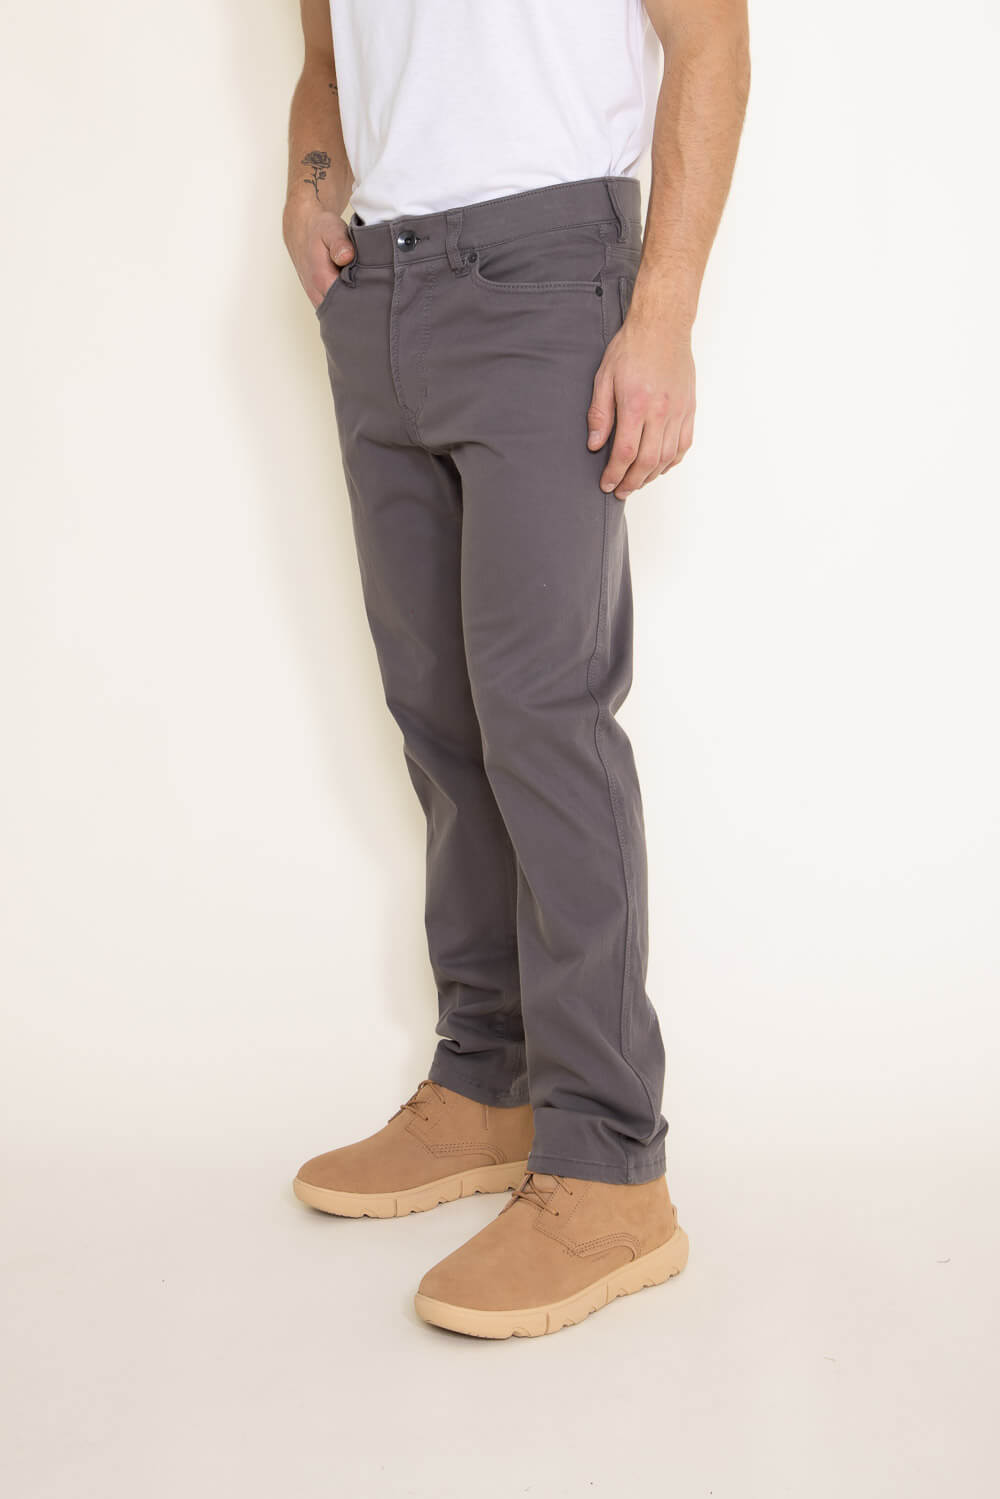 Union Five Pocket Comfort Twill Pants for Men in Grey | H3538WT 